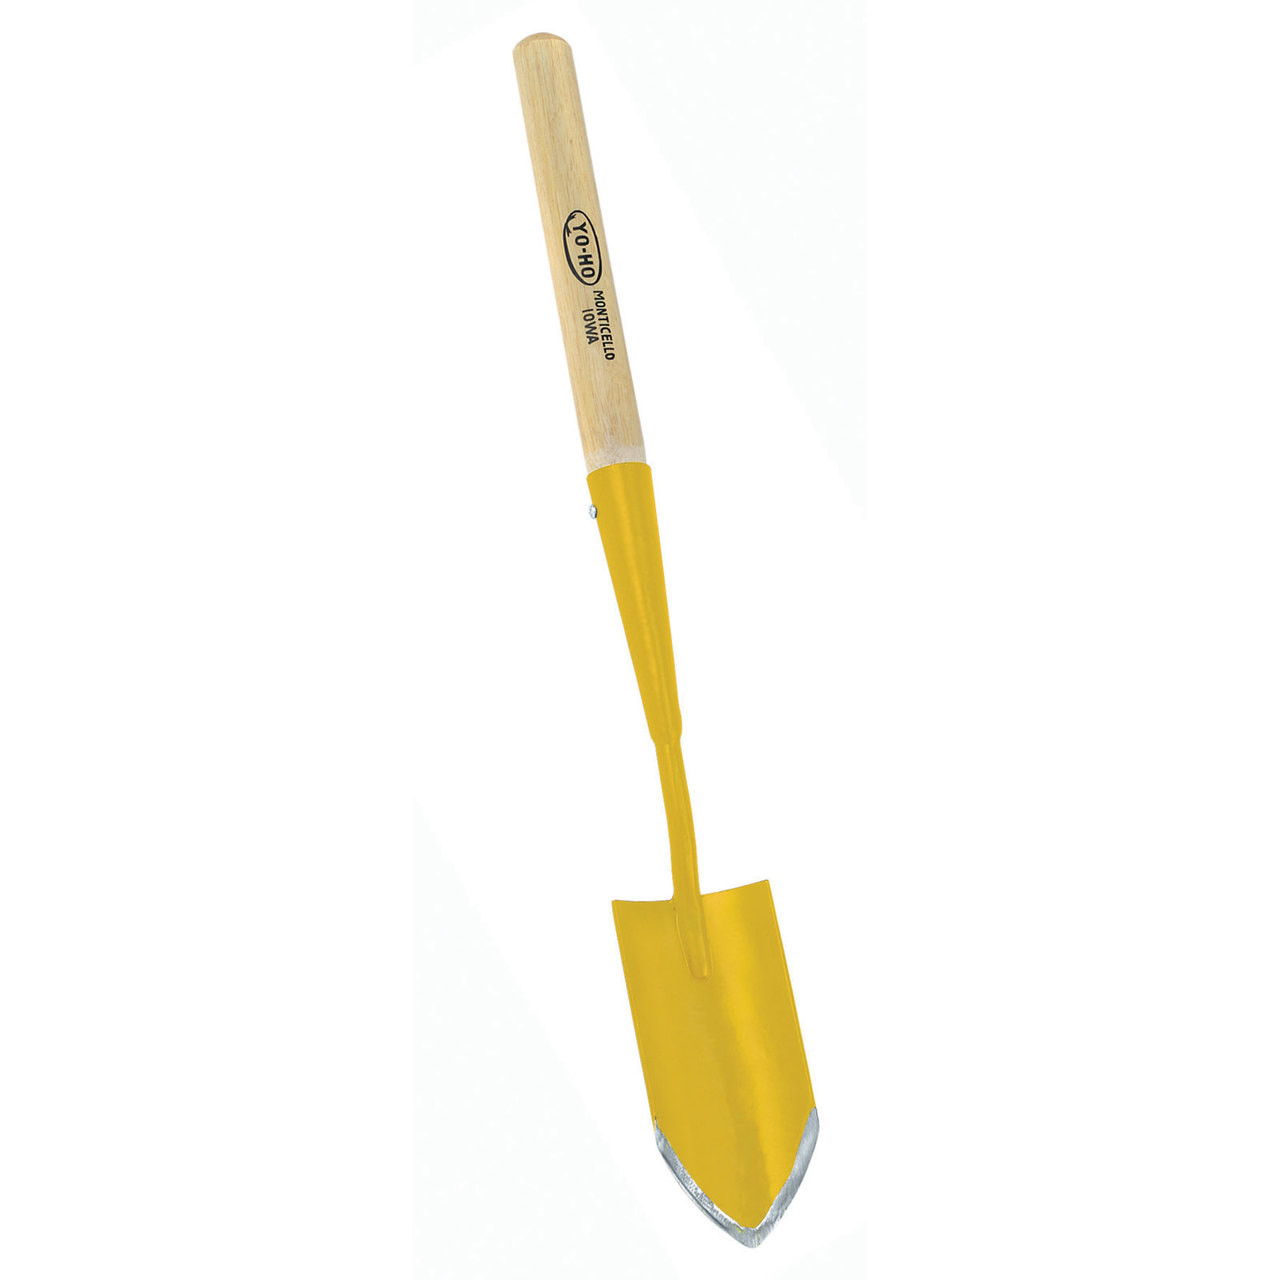 3 in 1 trapping tool . hammer, hoe, trowel. PA trapping supplies . Trapping  in PA